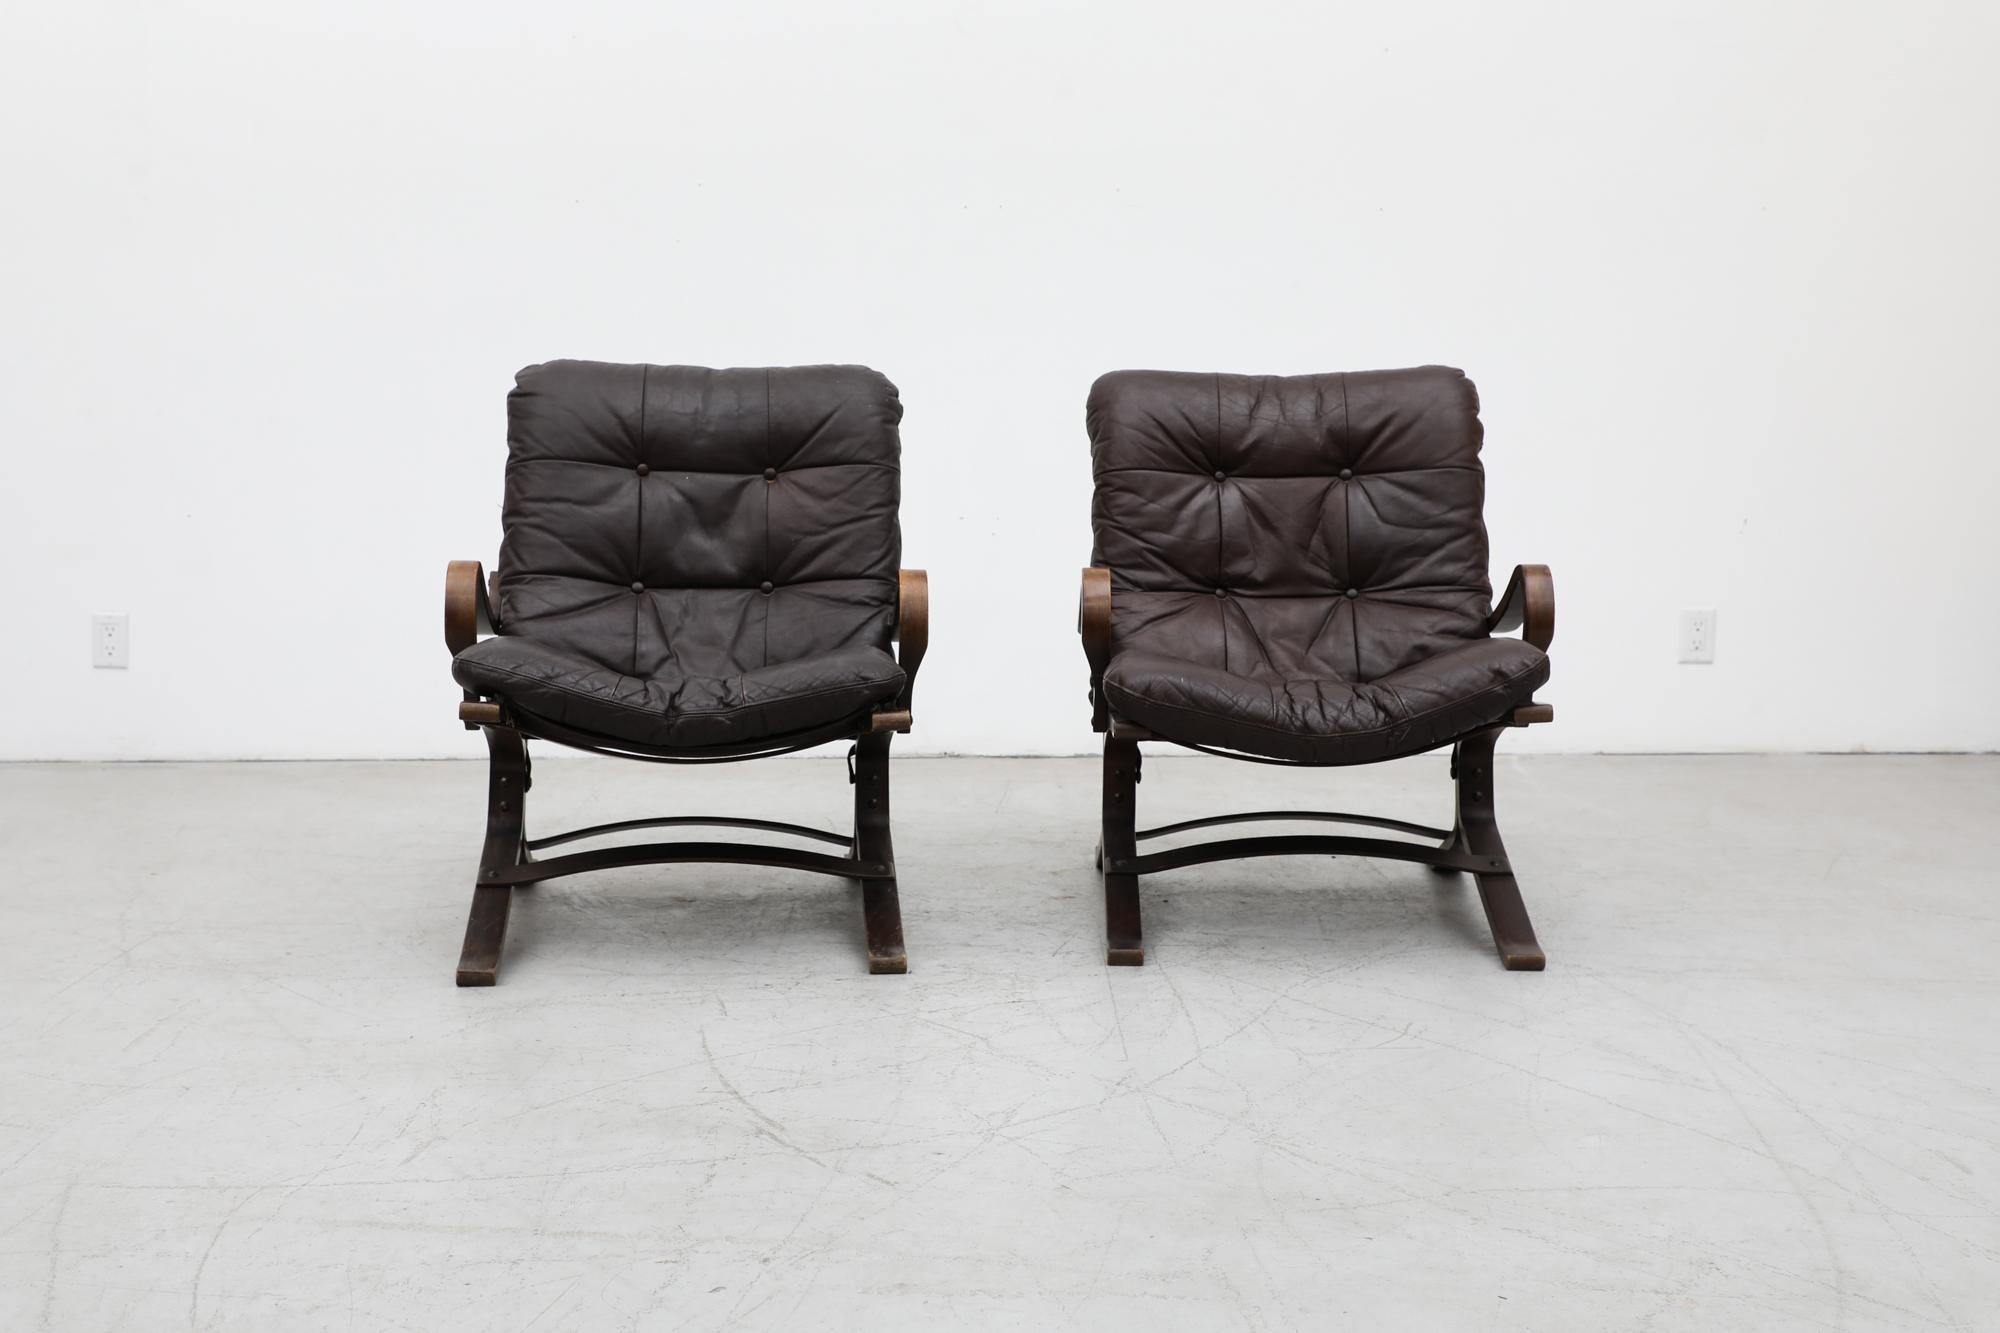 Pair of Westnofa 'Siesta' lounge chairs with bent wood frame, laced canvas sling support and original dark brown leather cushions. Designed by Ingmar Relling. In original condition with visible wear consistent with their age and use. Visible wear